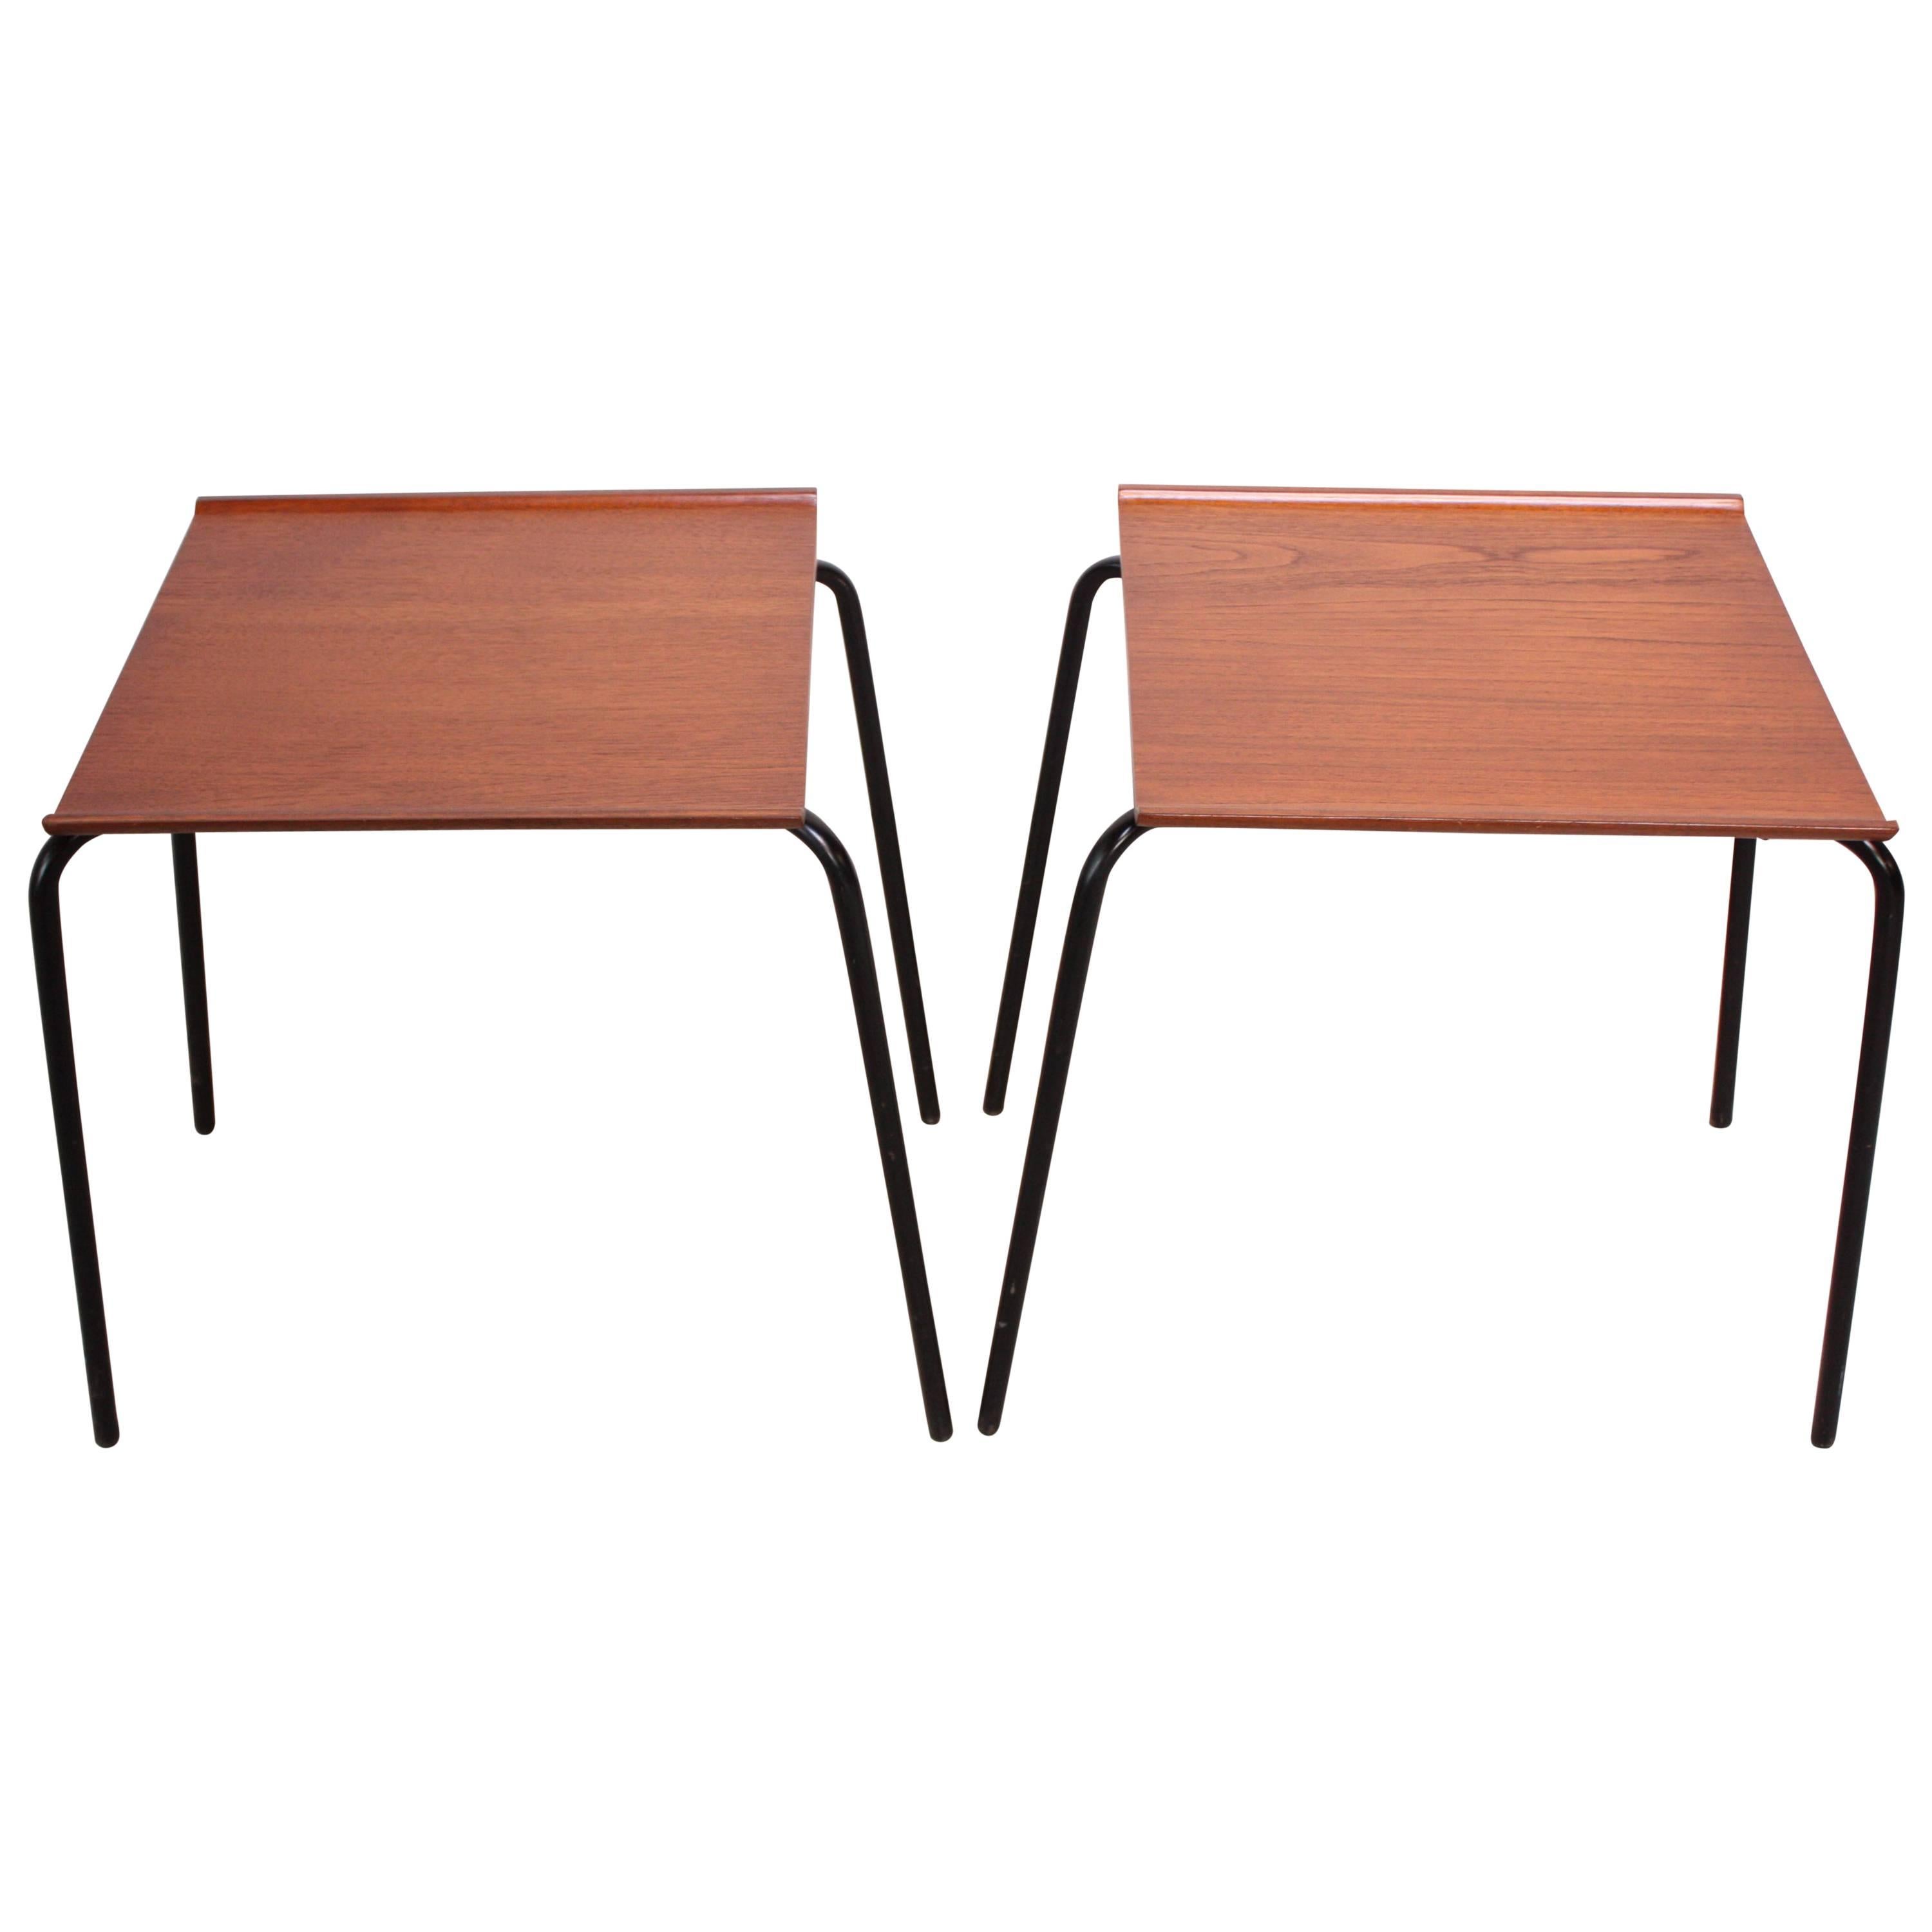 Pair of Danish Teak and Metal 'Stacking Tables' Attributed to Fritz Hansen For Sale